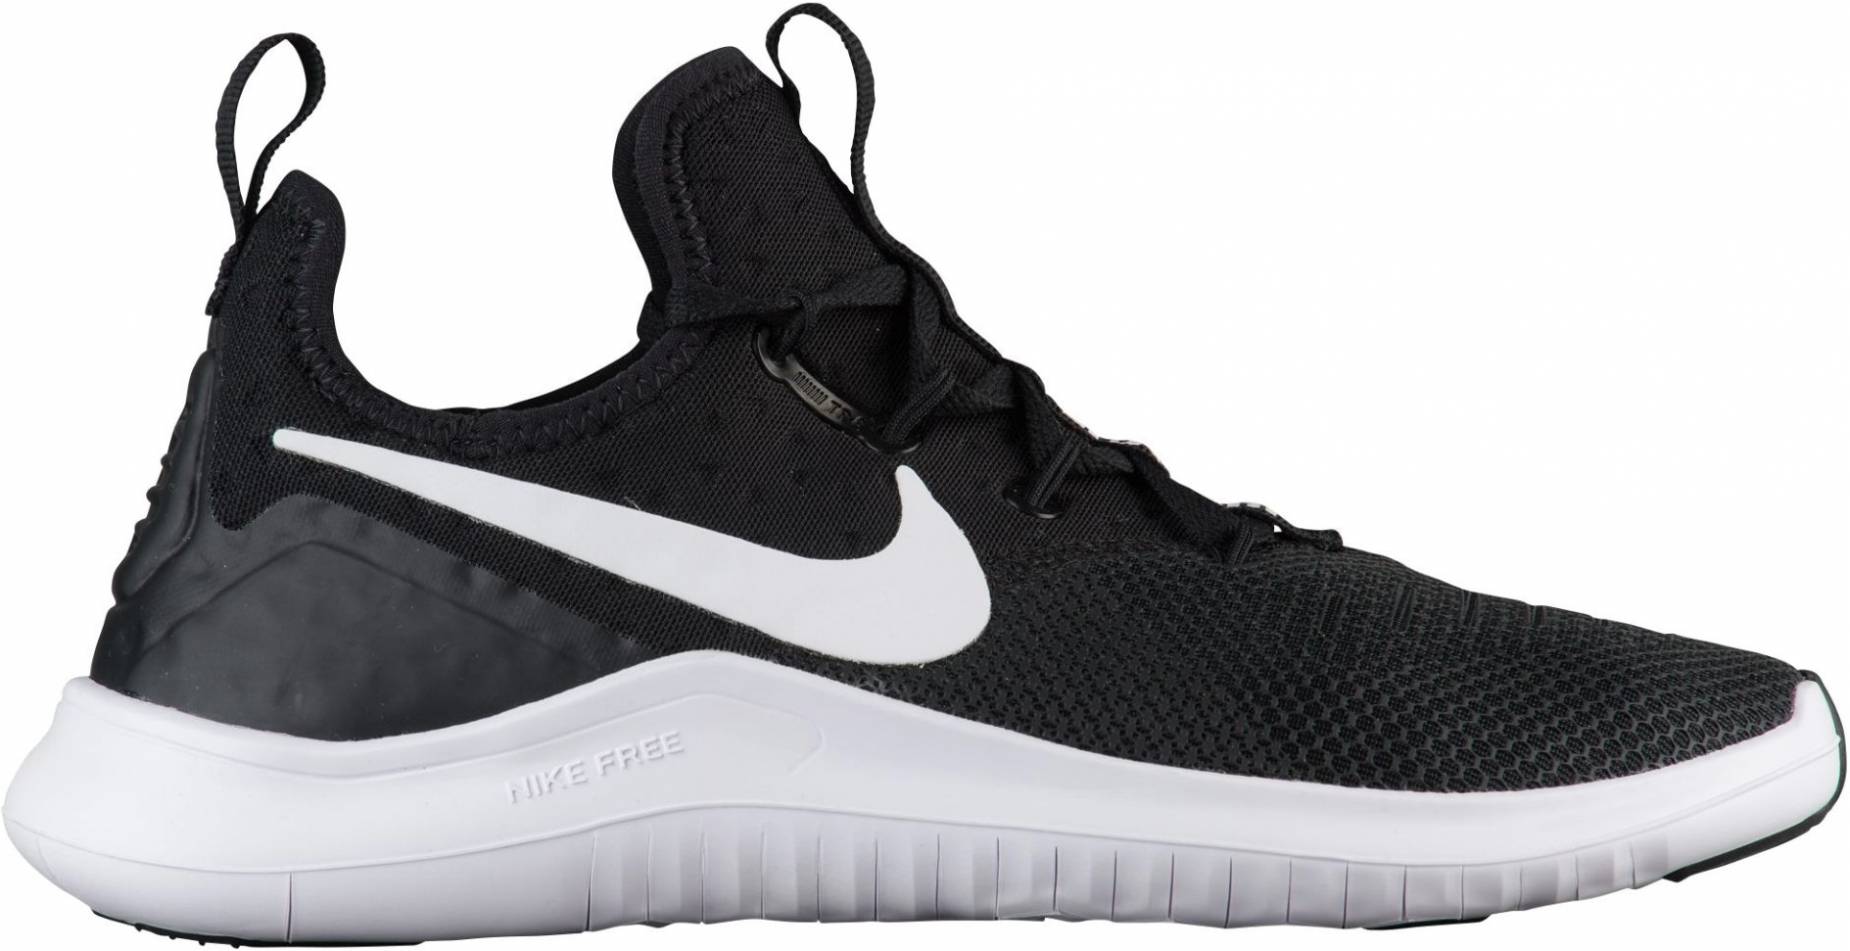 Only £67 + Review of Nike Free TR 8 